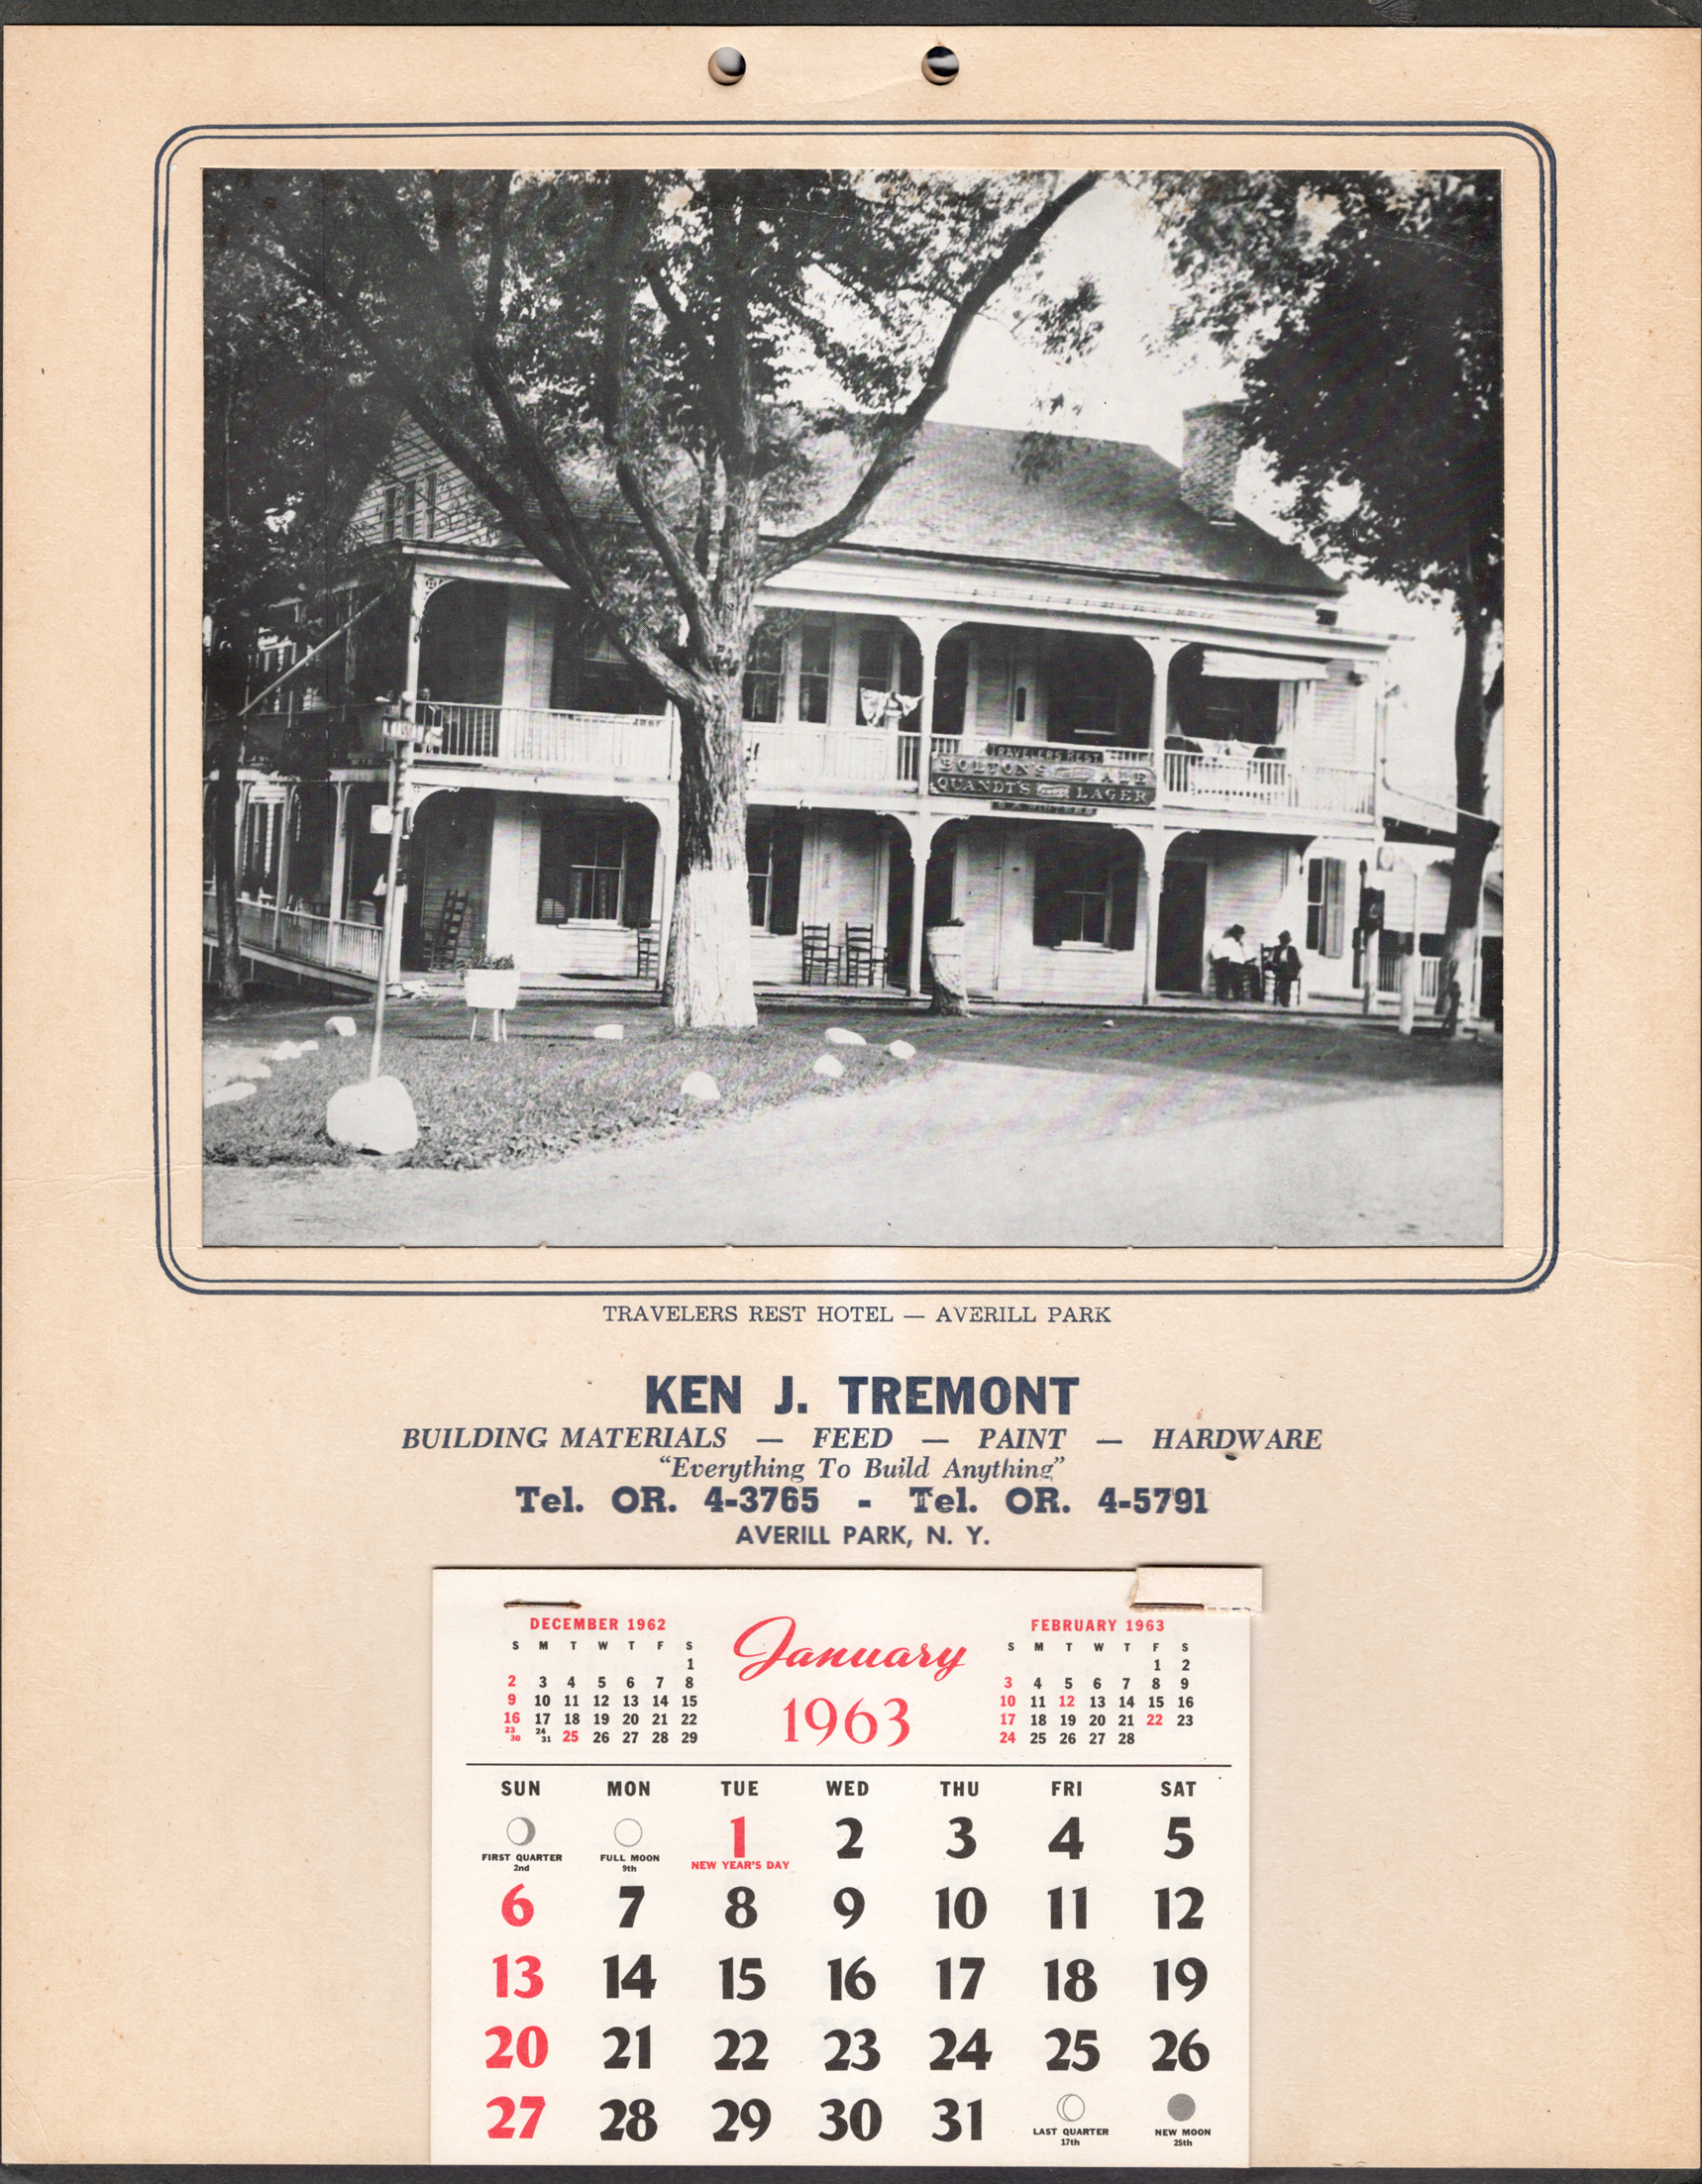 Tremont Lumber Company calendar from 1963.